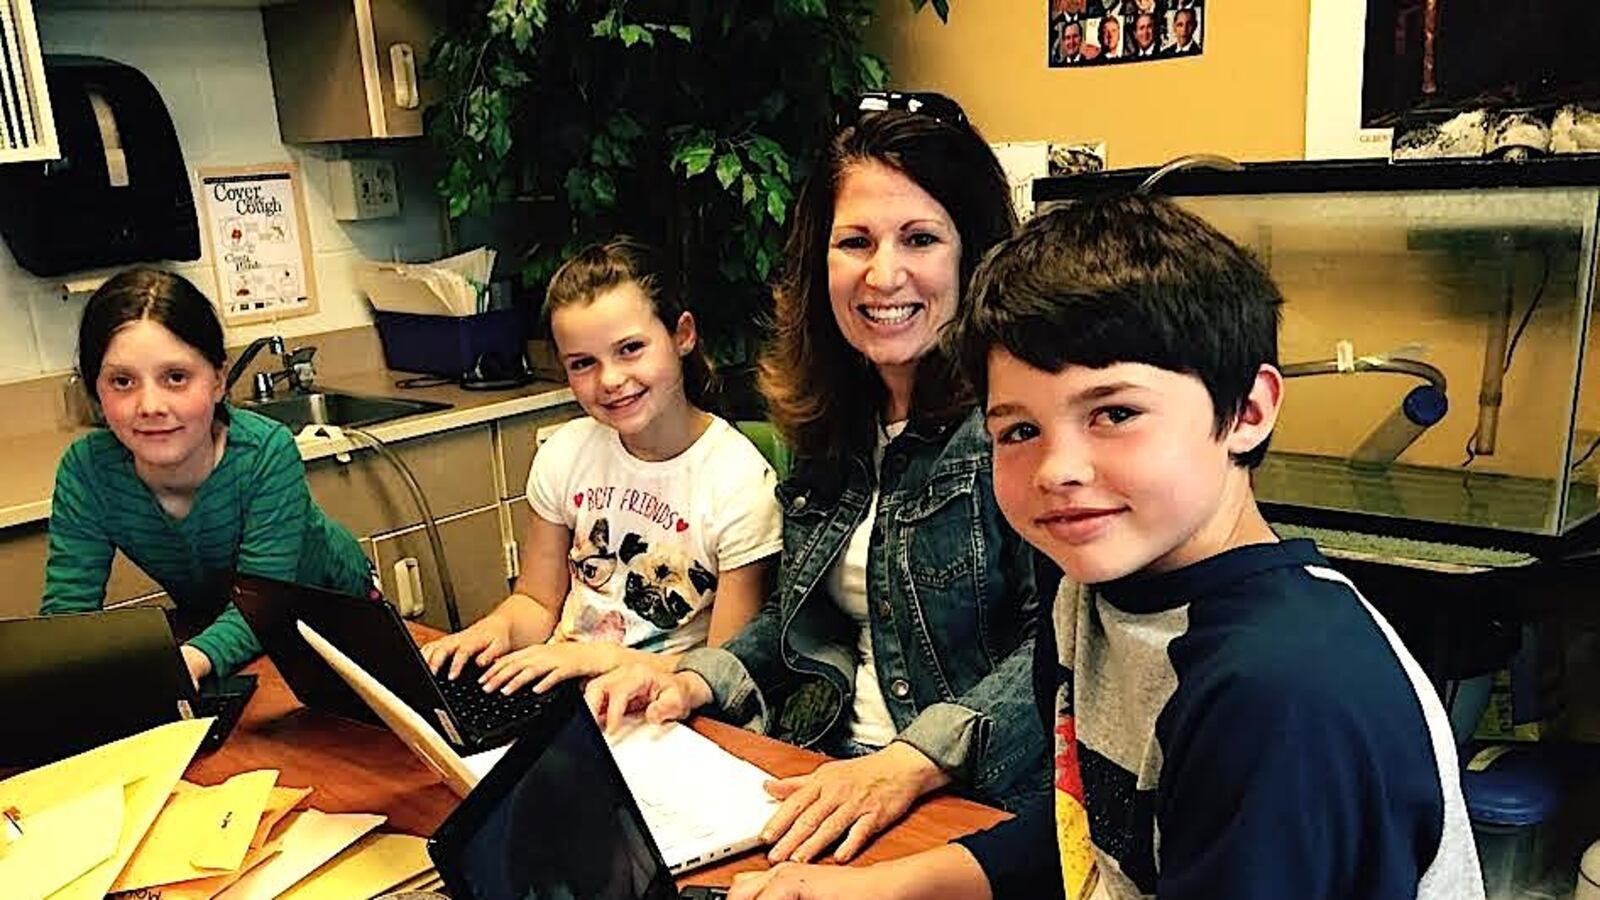 Cynthia Rimmer, a fourth grade teacher at Fraser Valley Elementary School in the East Grand School District, works with students.